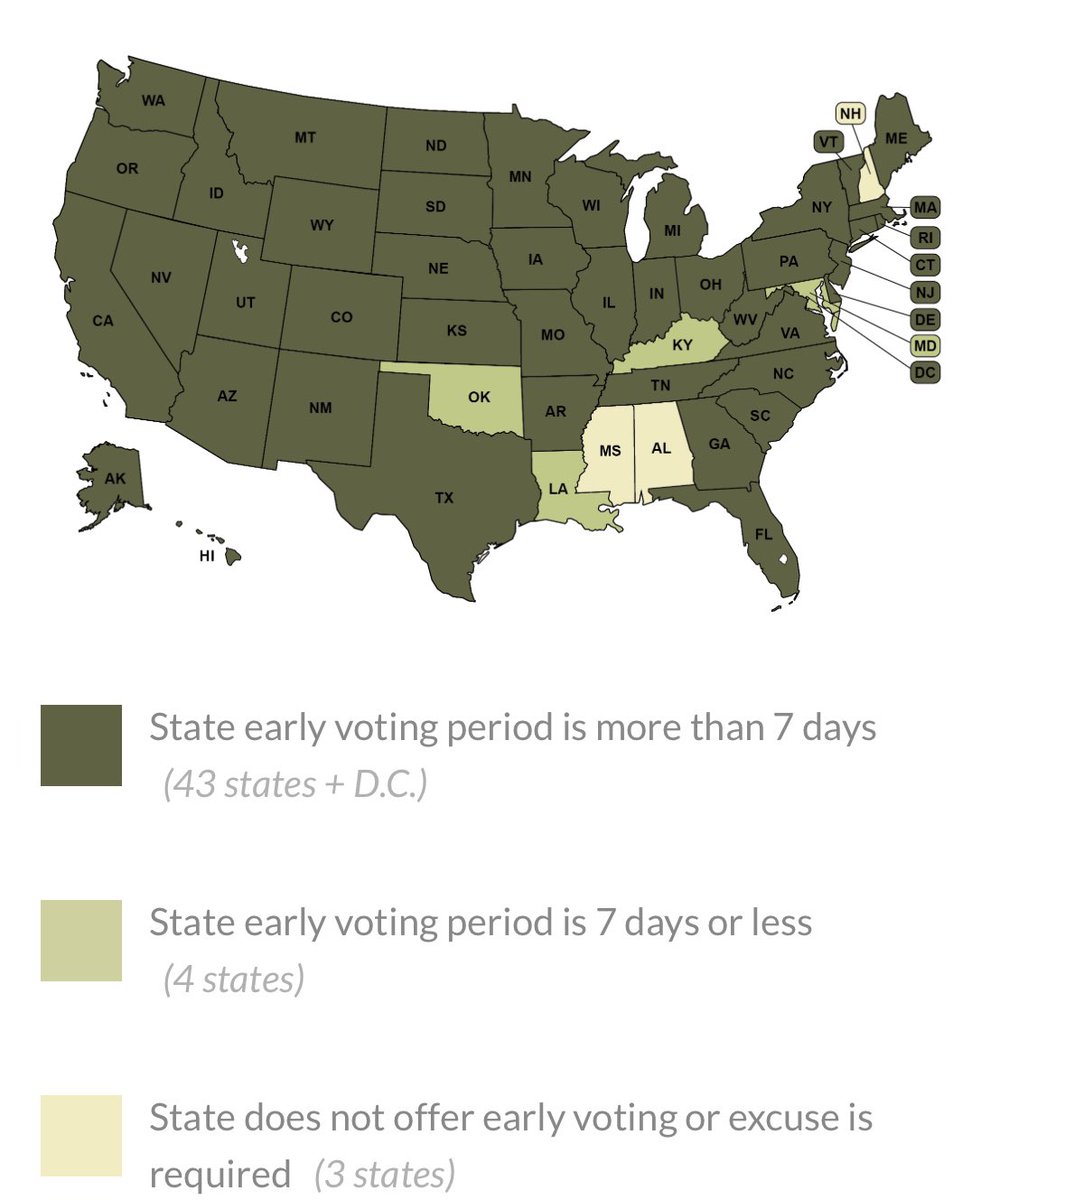 Can someone give me ONE GOOD REASON some states are allowing early Presidential voting in SEPTEMBER? WTF?